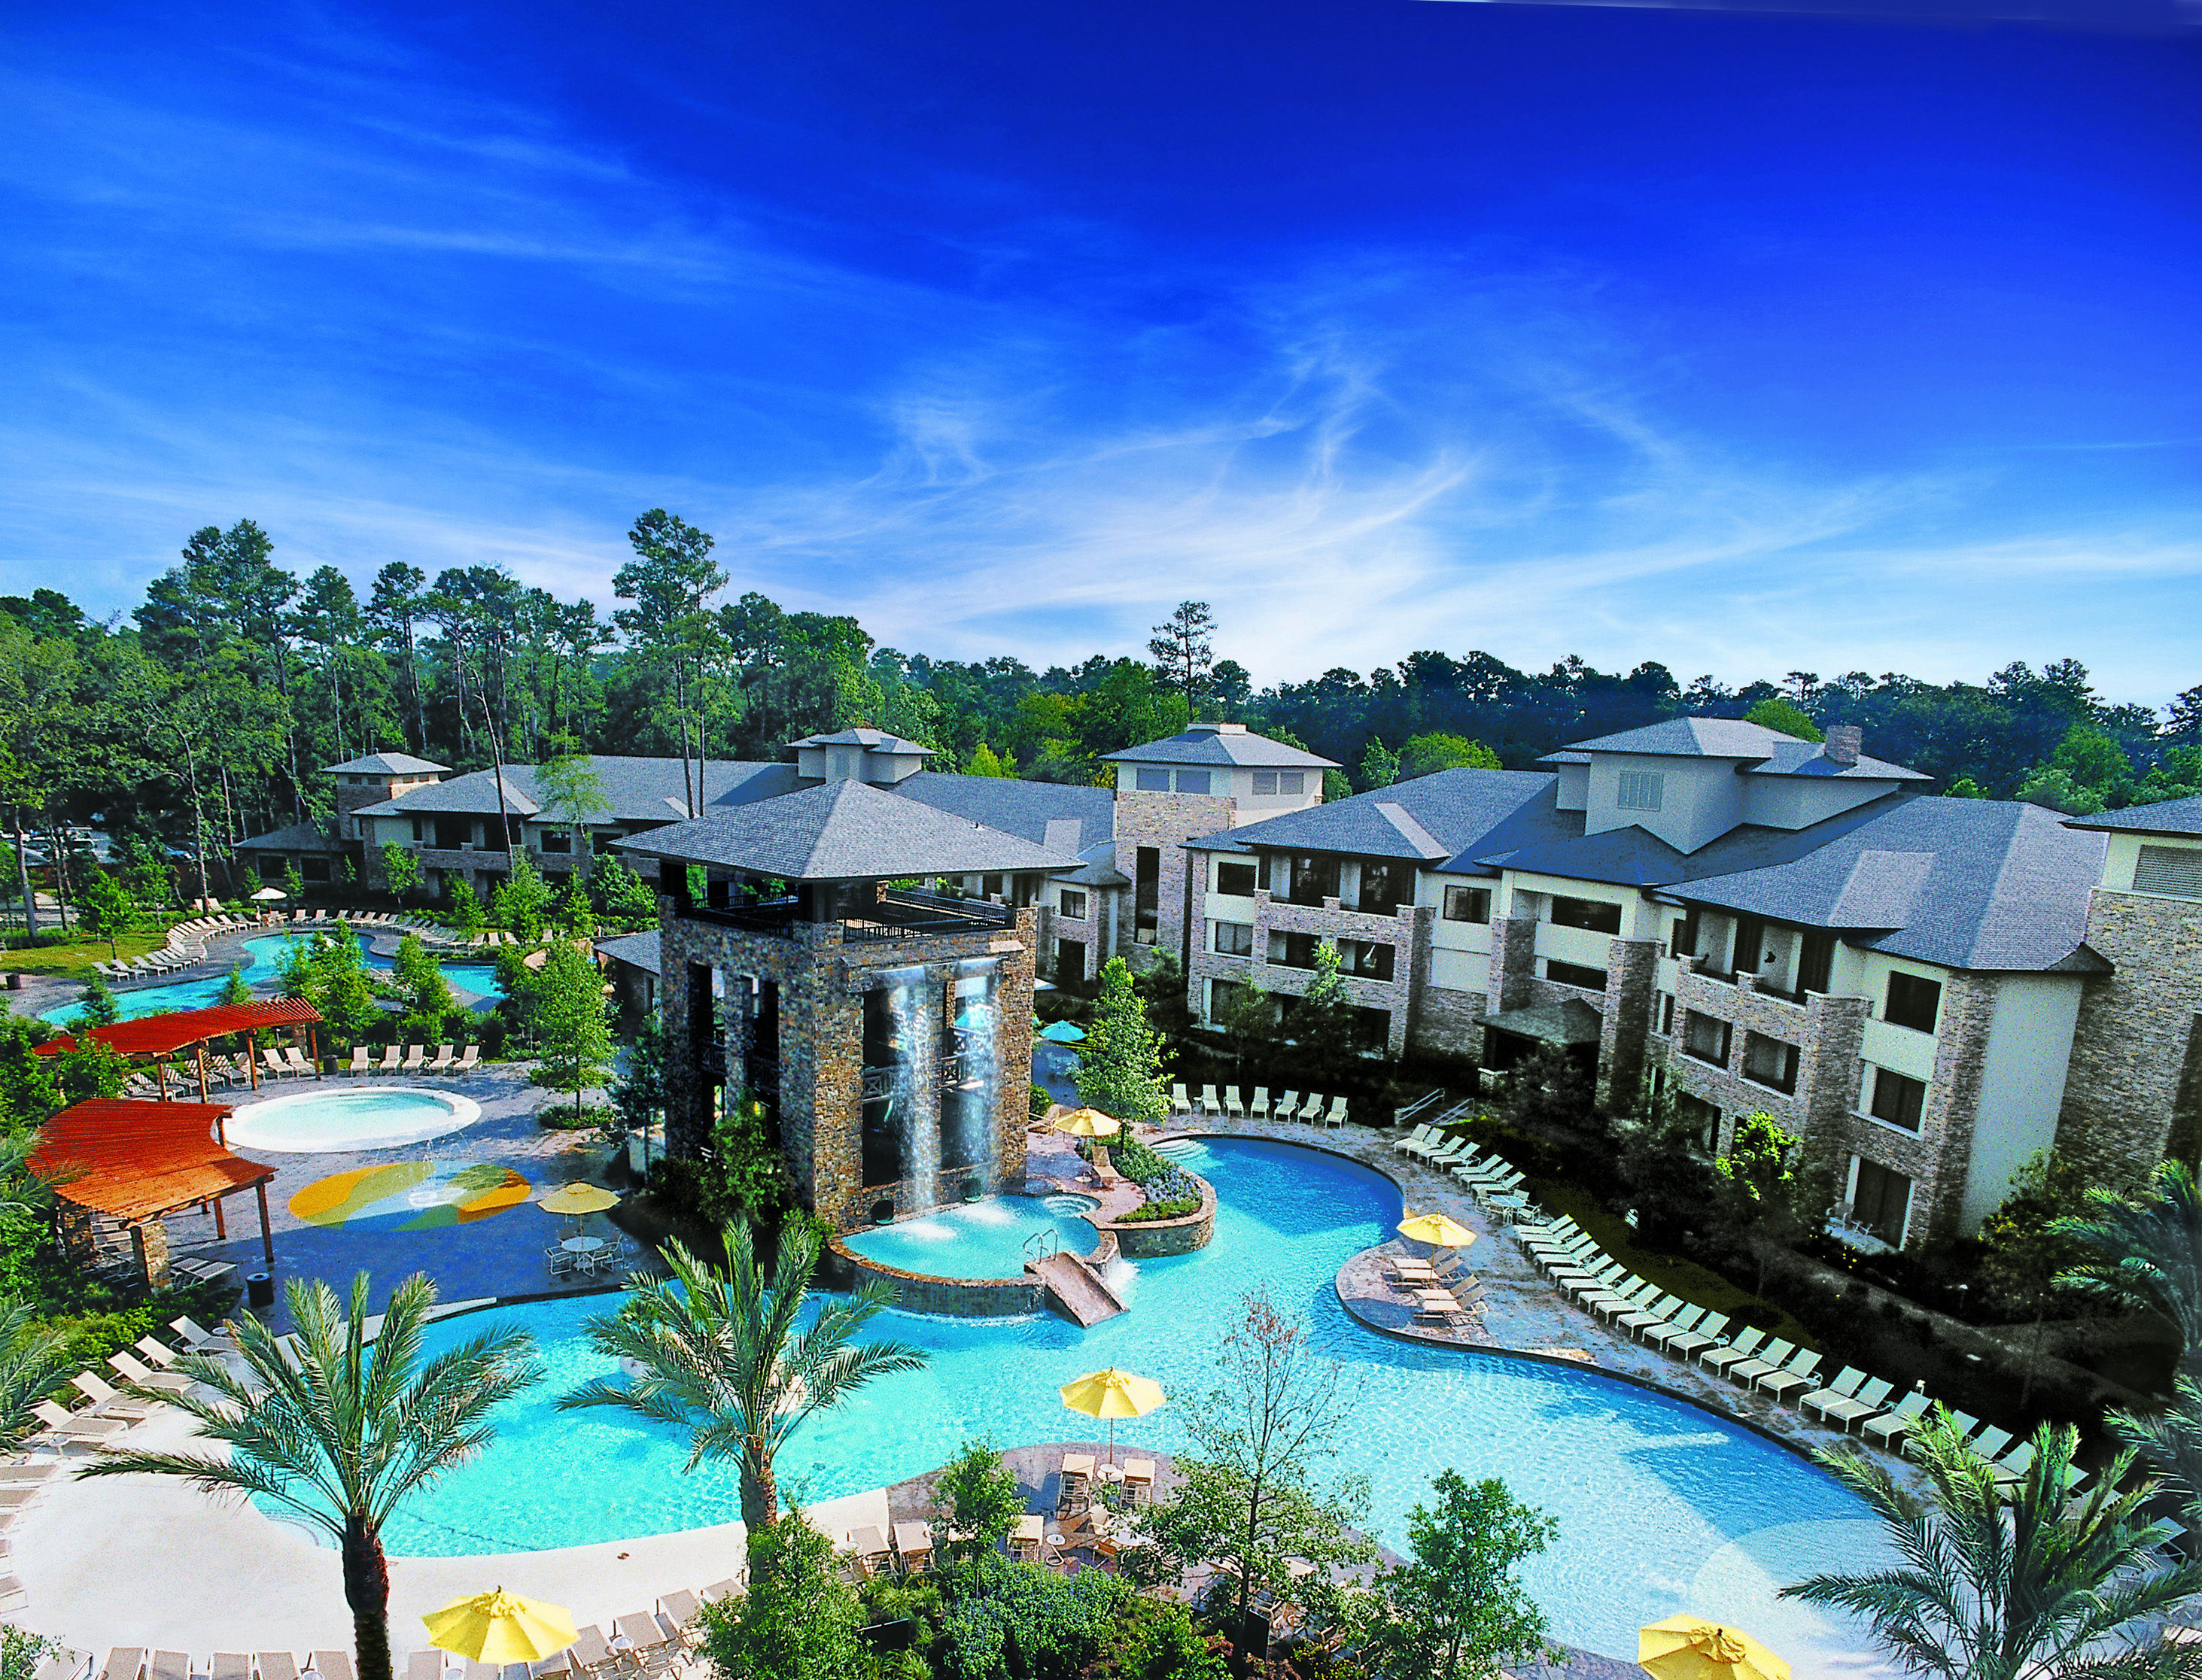 Ultimate Family Staycation at The Woodlands Resort - Family Fun Journal